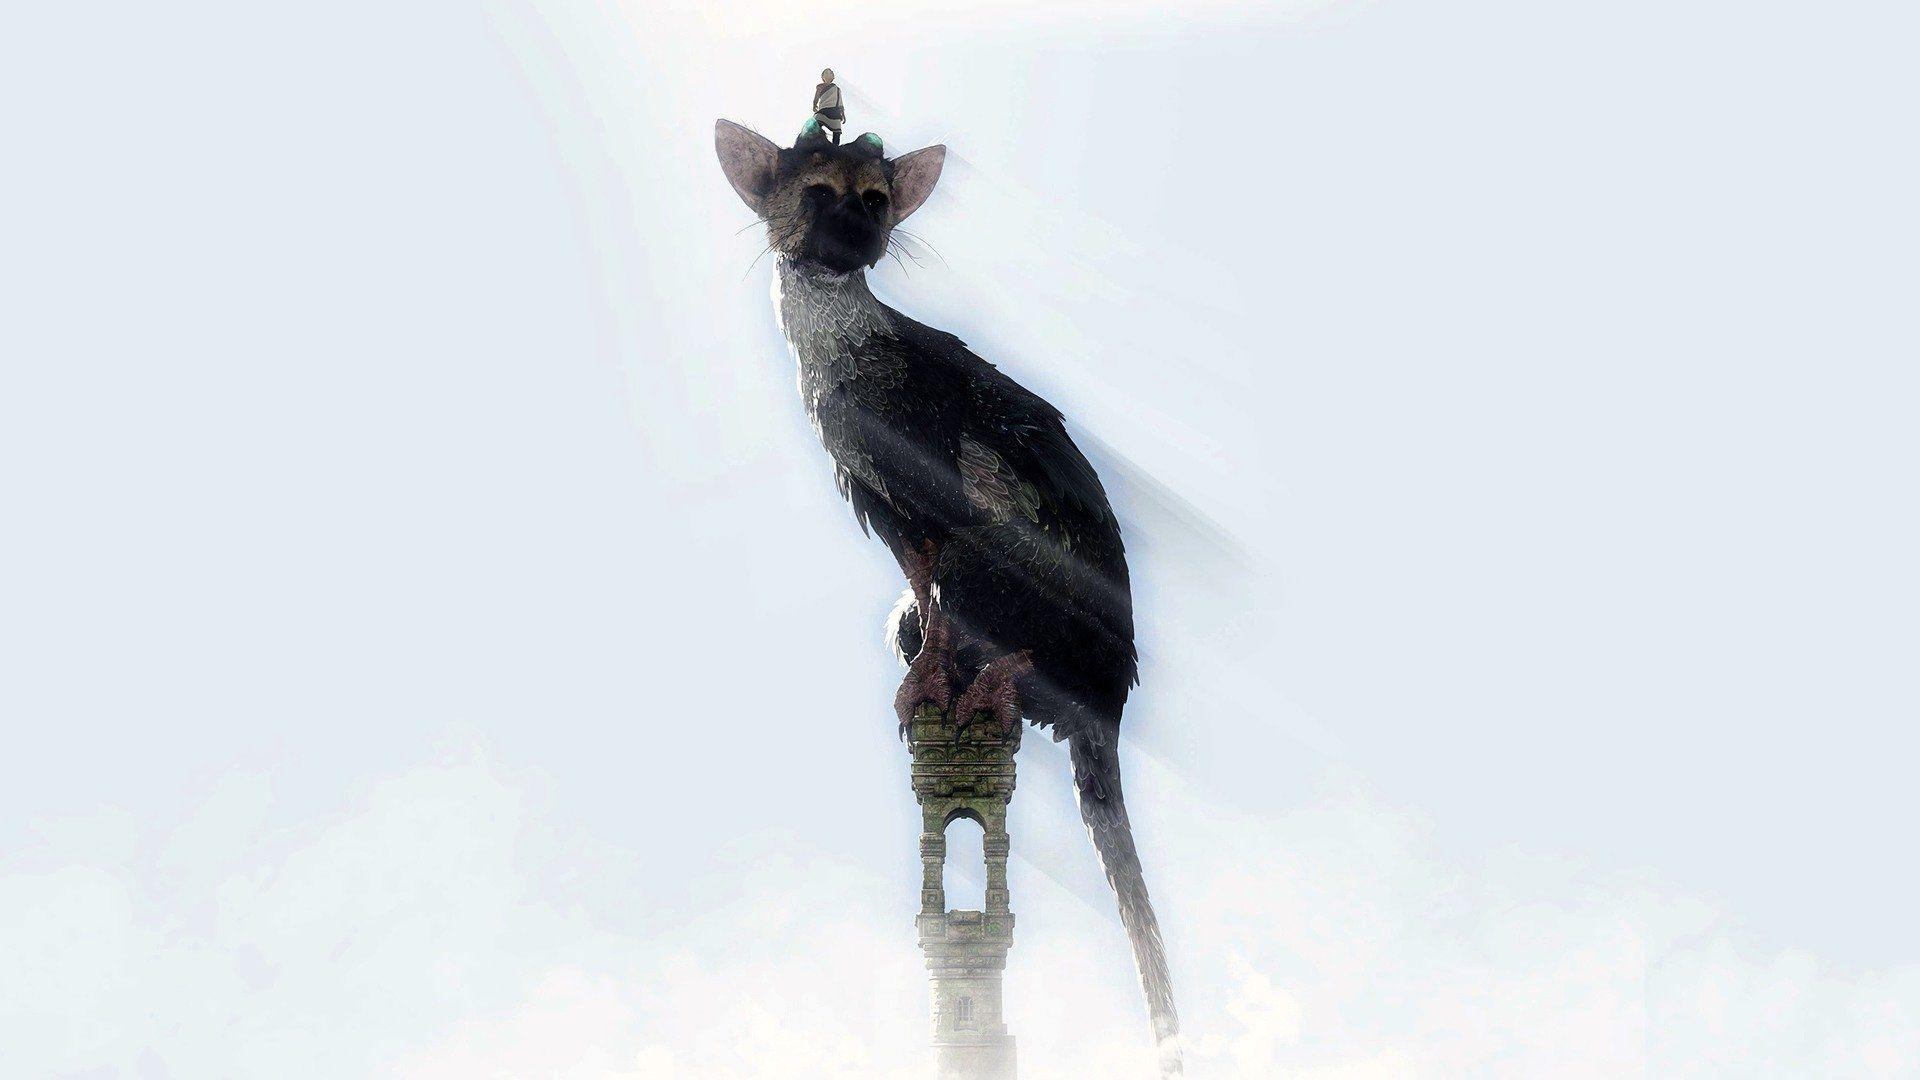 the last guardian pc requirments